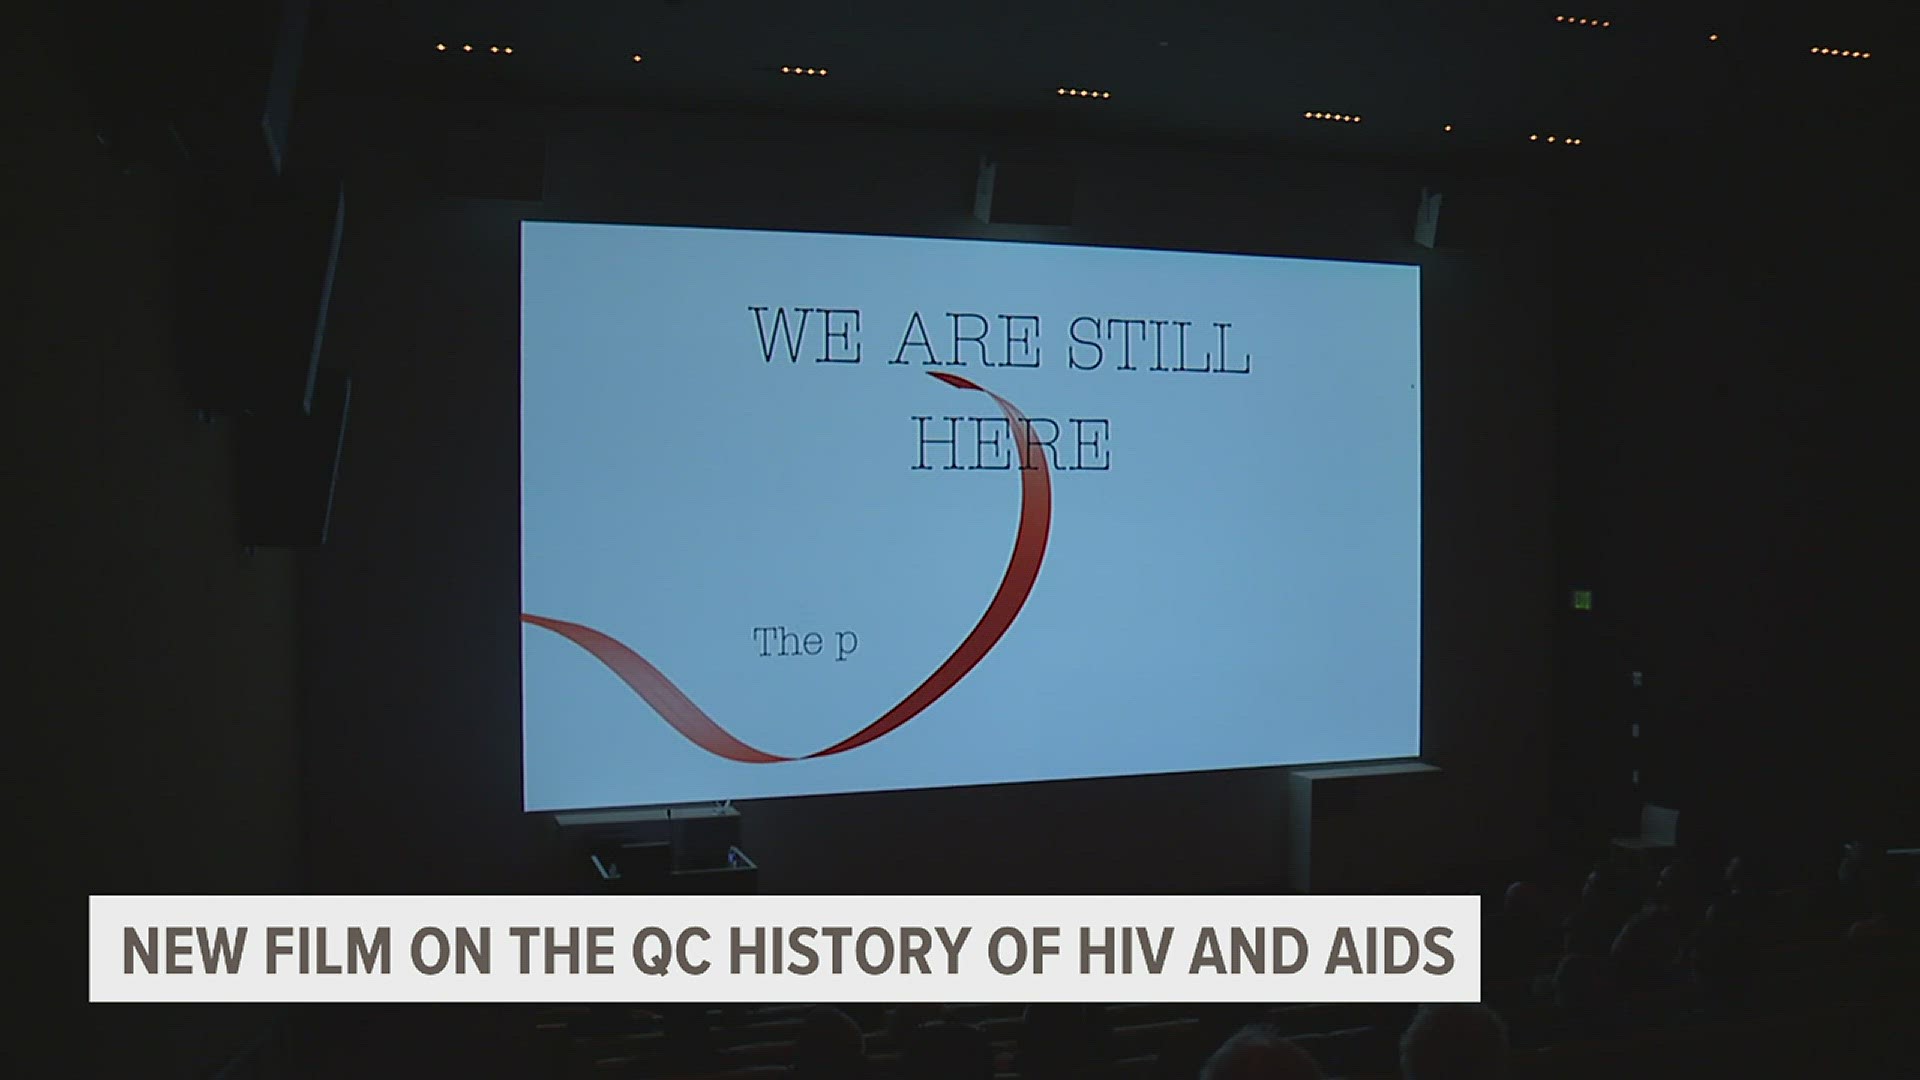 The Project QC hopes this documentary will raise awareness of HIV and AIDS in our community.